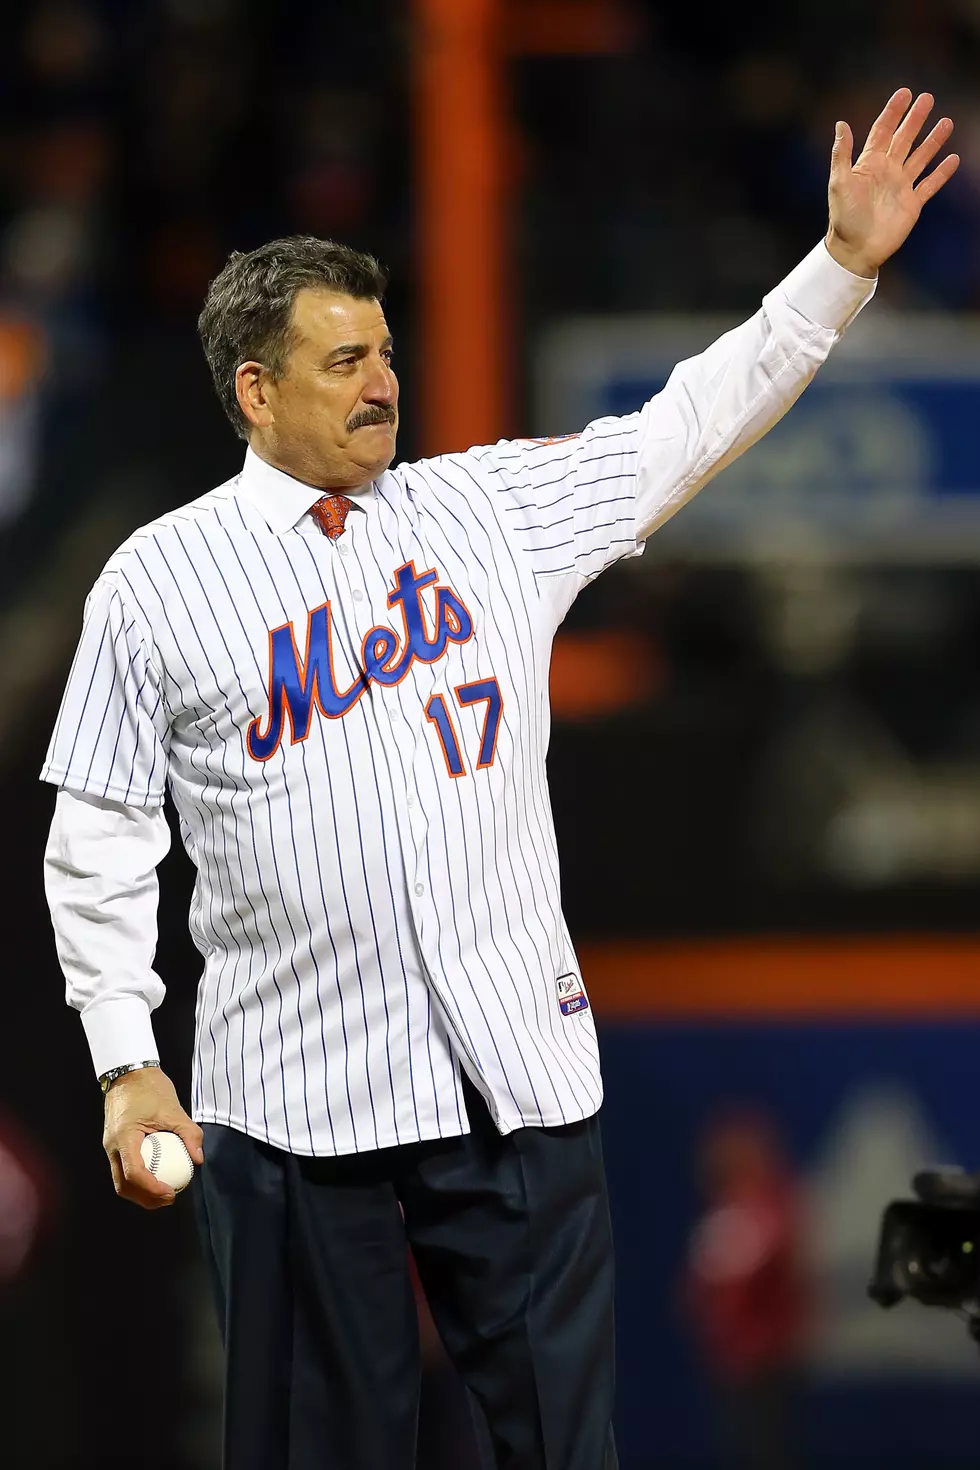 NYS Hall of Fame Inductee Keith Hernandez Joins 104.5 The Team